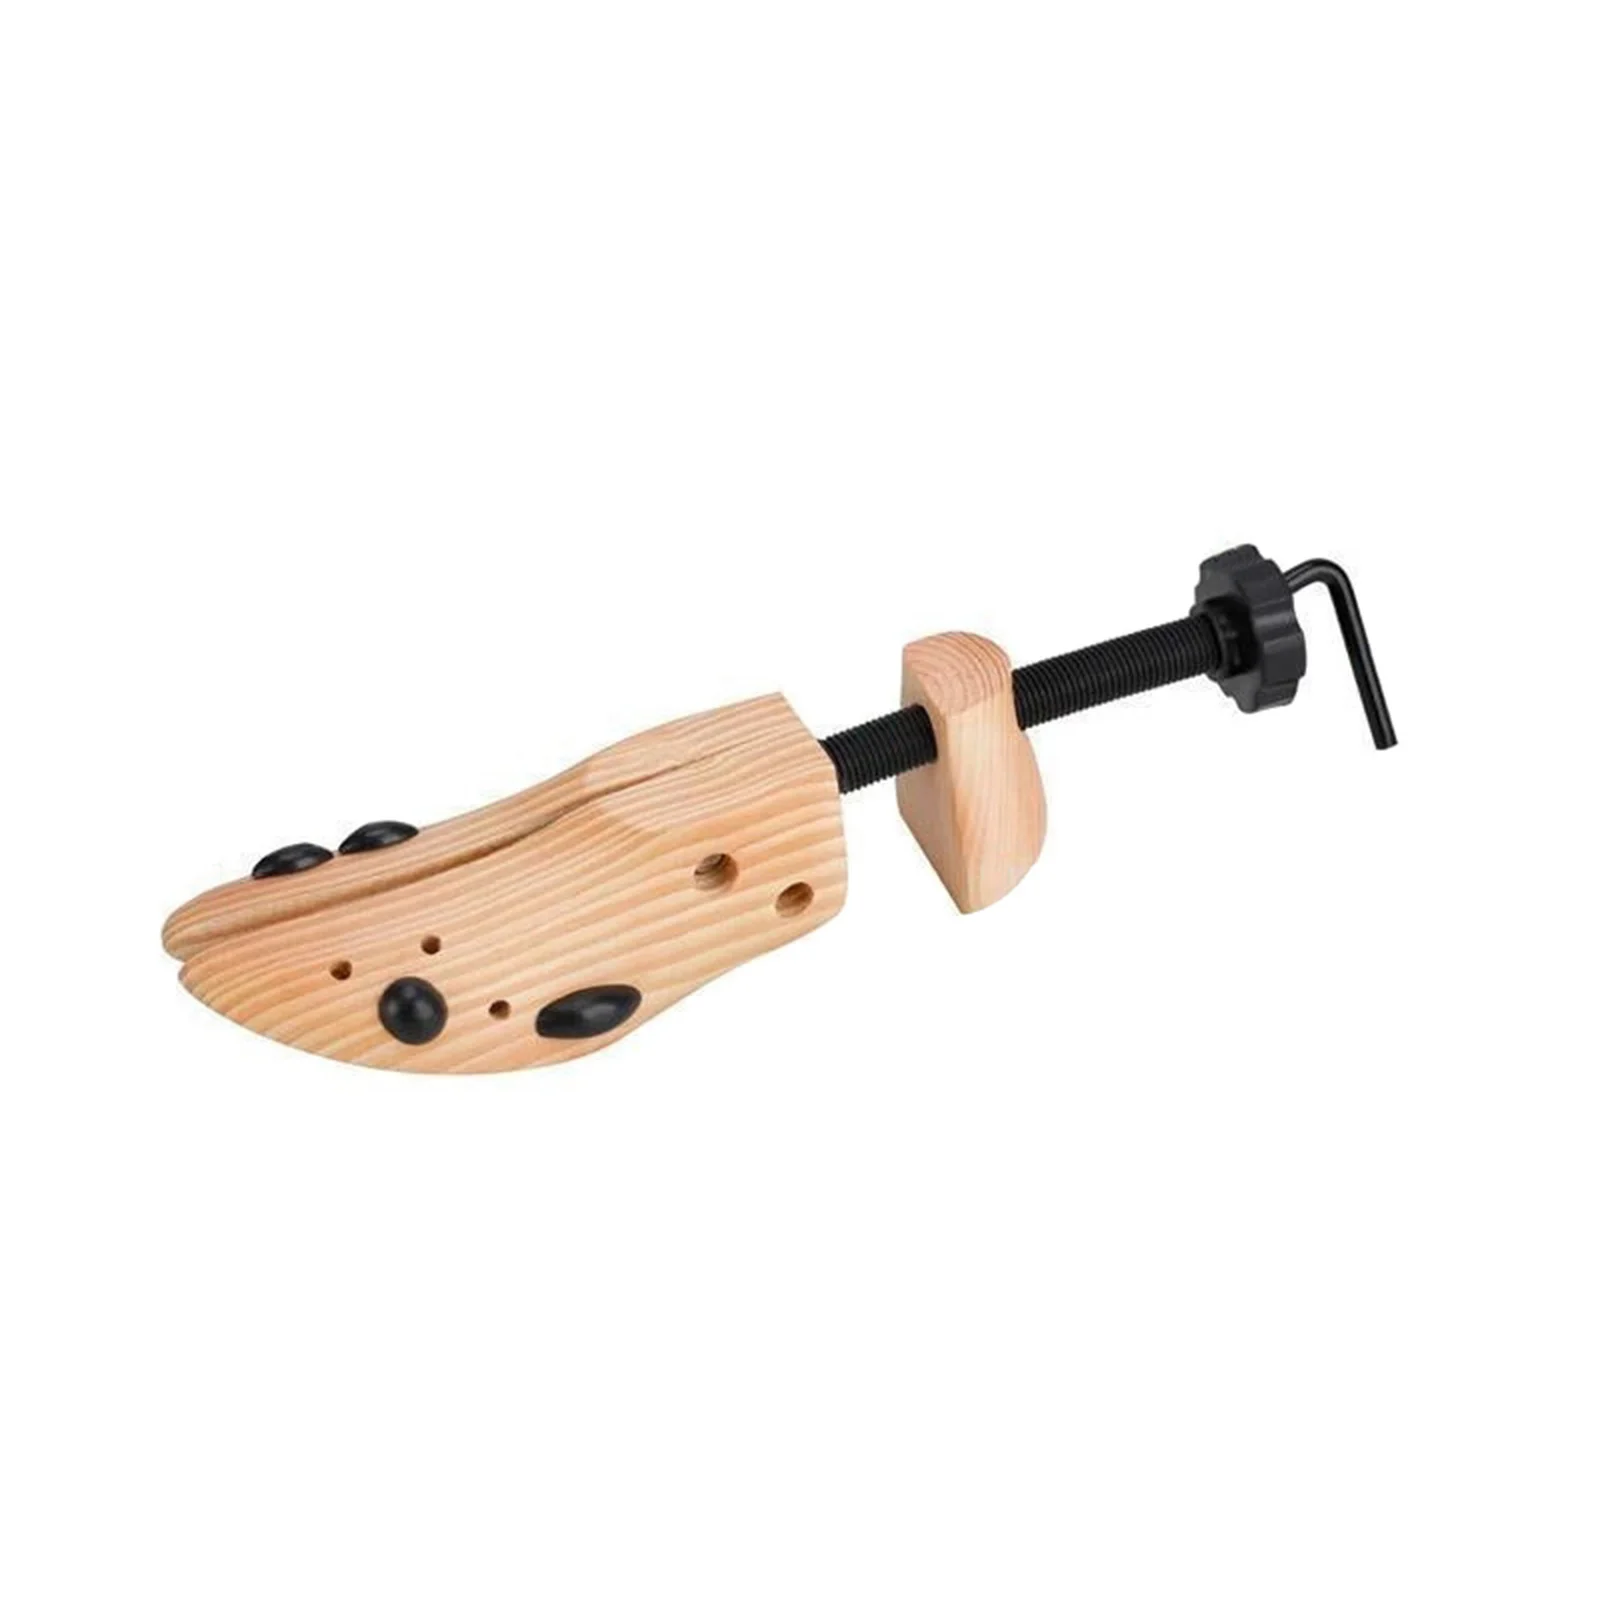 Hot Selling Durable Anti-rust Adjustable Smooth Wooden Shoe Stretcher for Men Women Household -B5